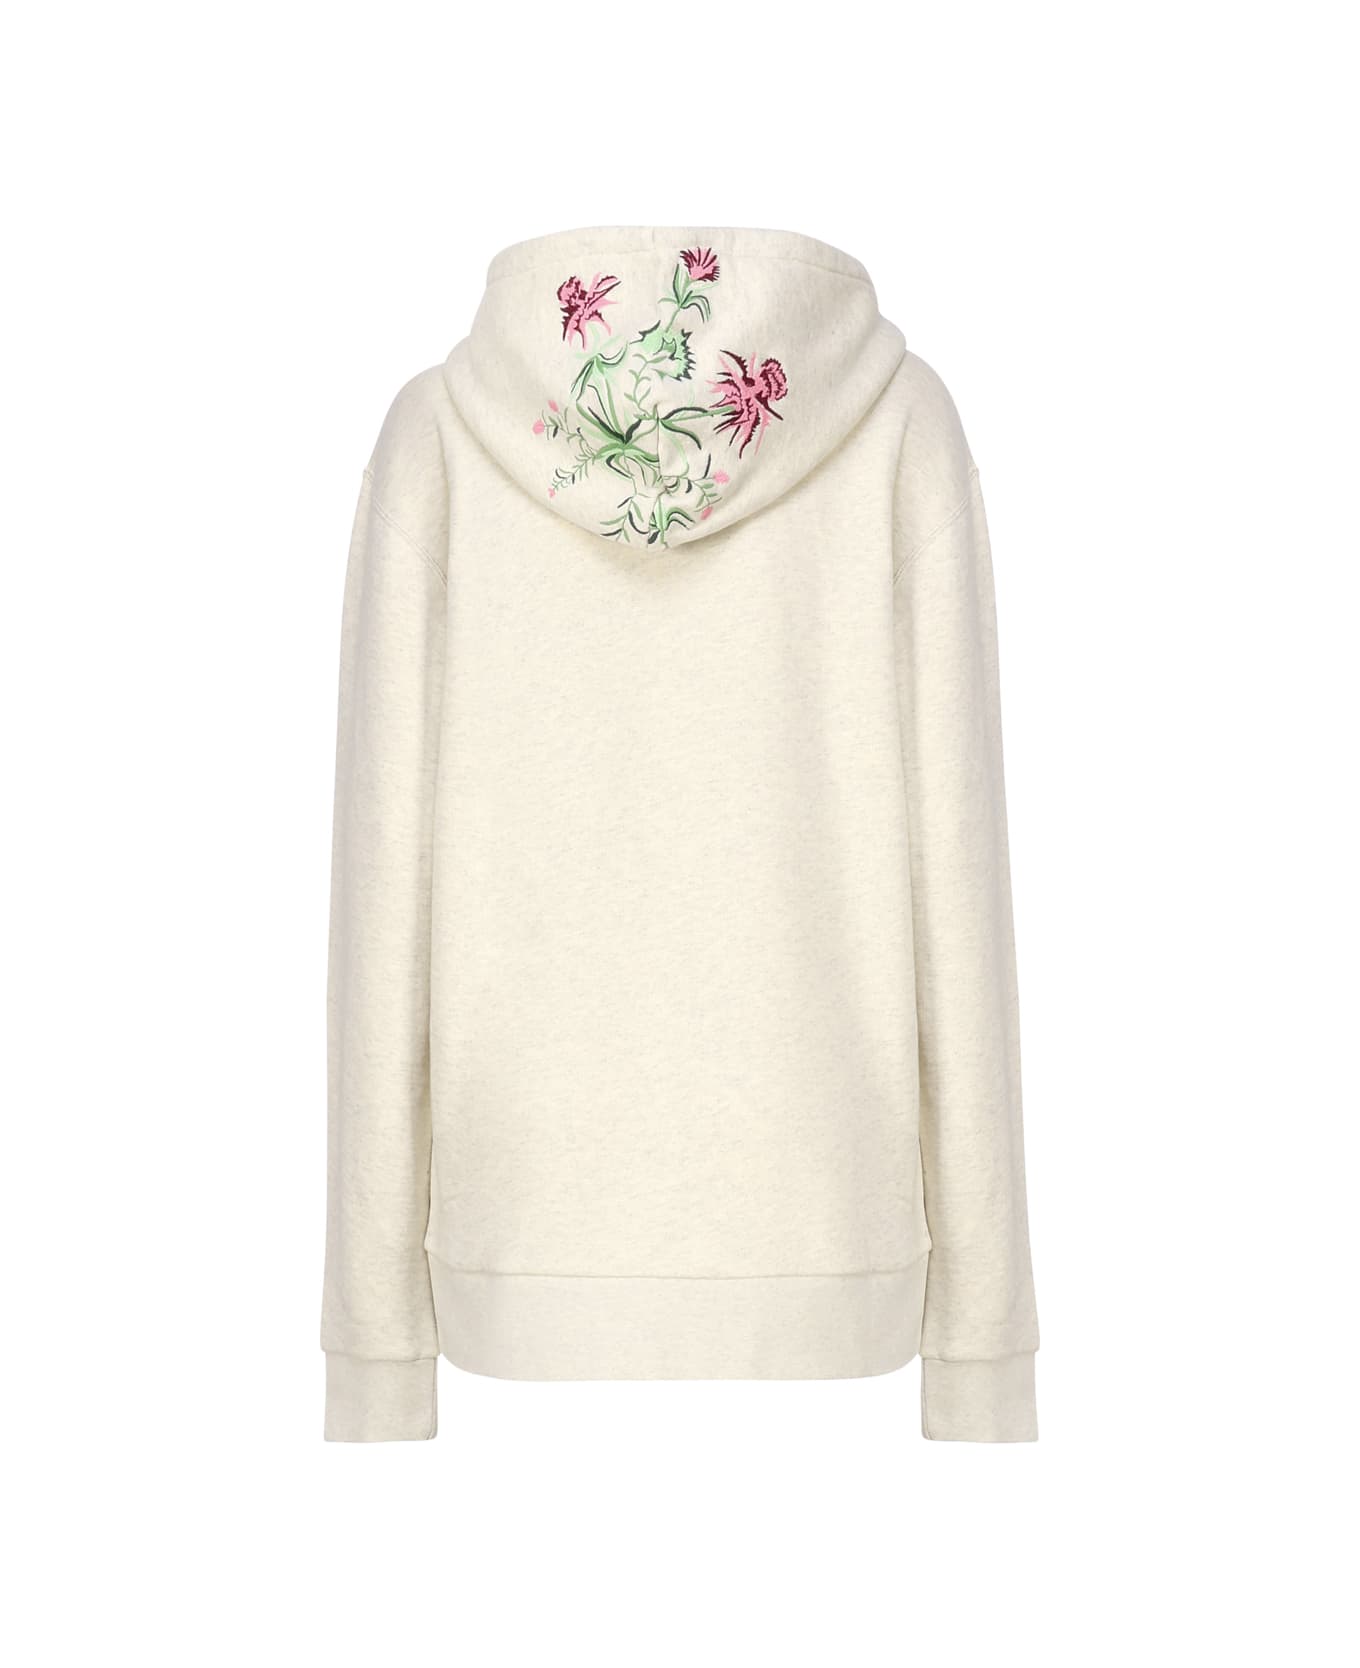 J.W. Anderson Sweatshirt With Embroidery - Beige